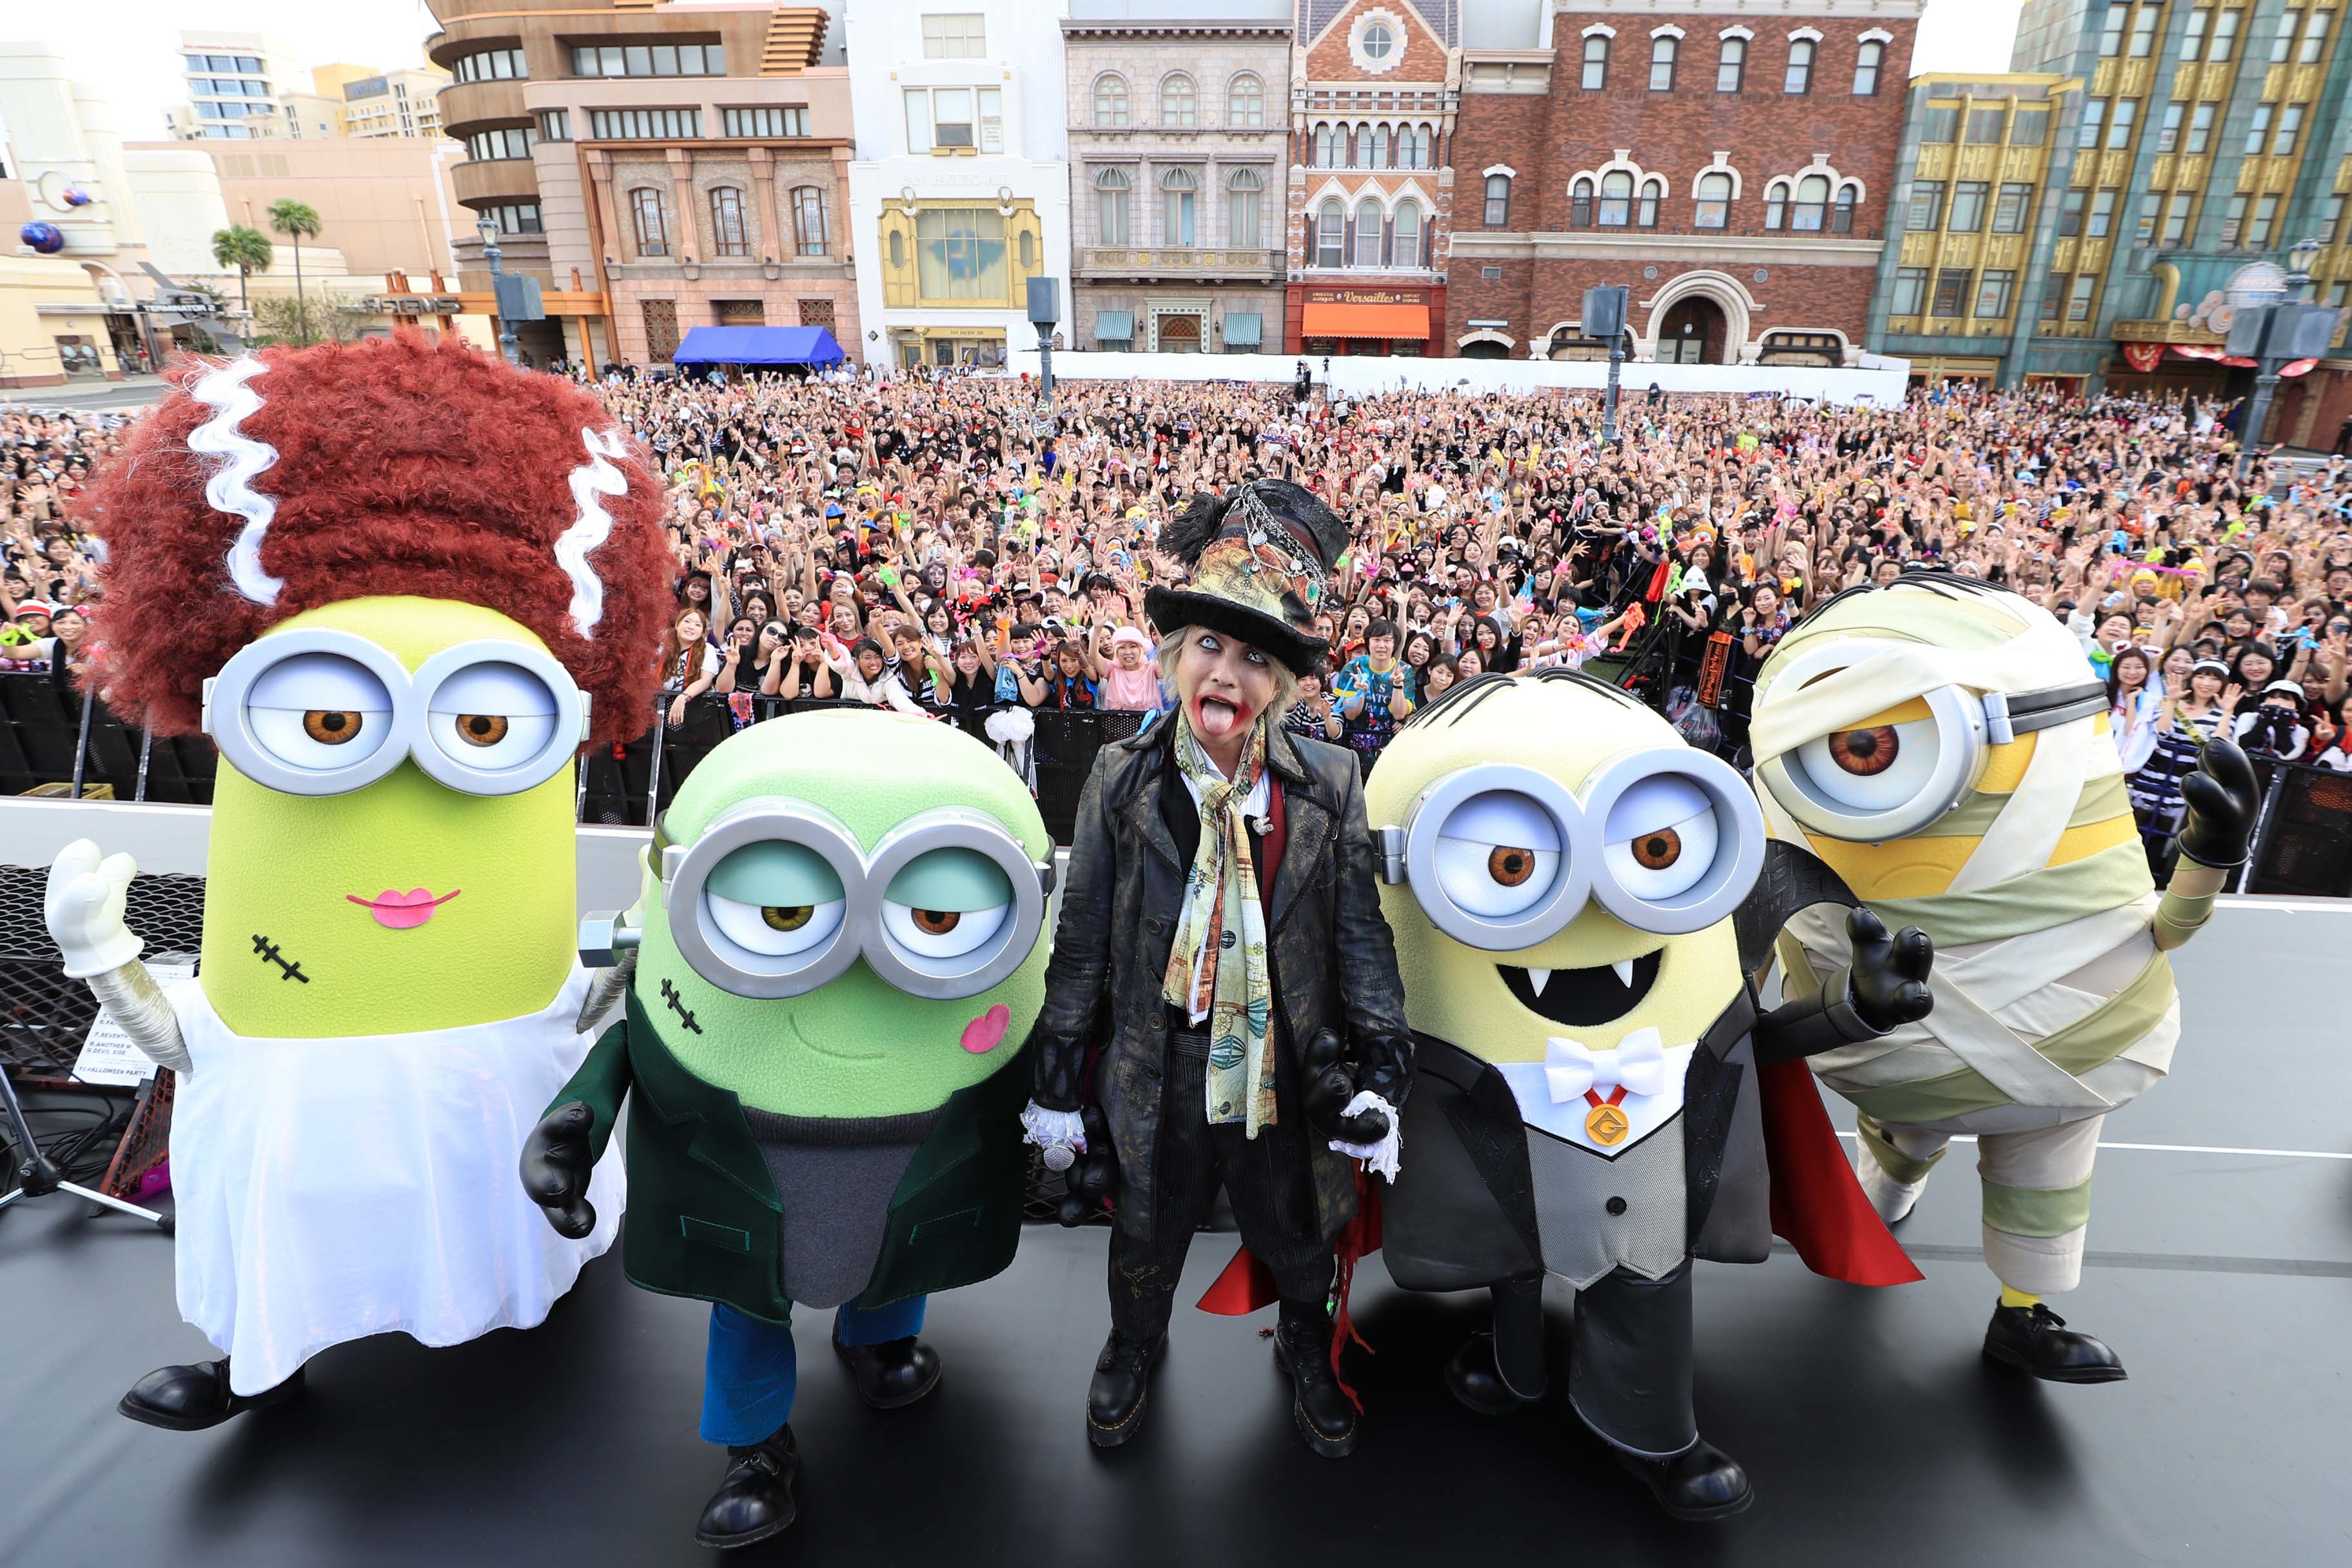 Despicable Me, Minion Made and all related marks and characters are trademarks and copyrights of Universal Studios. 